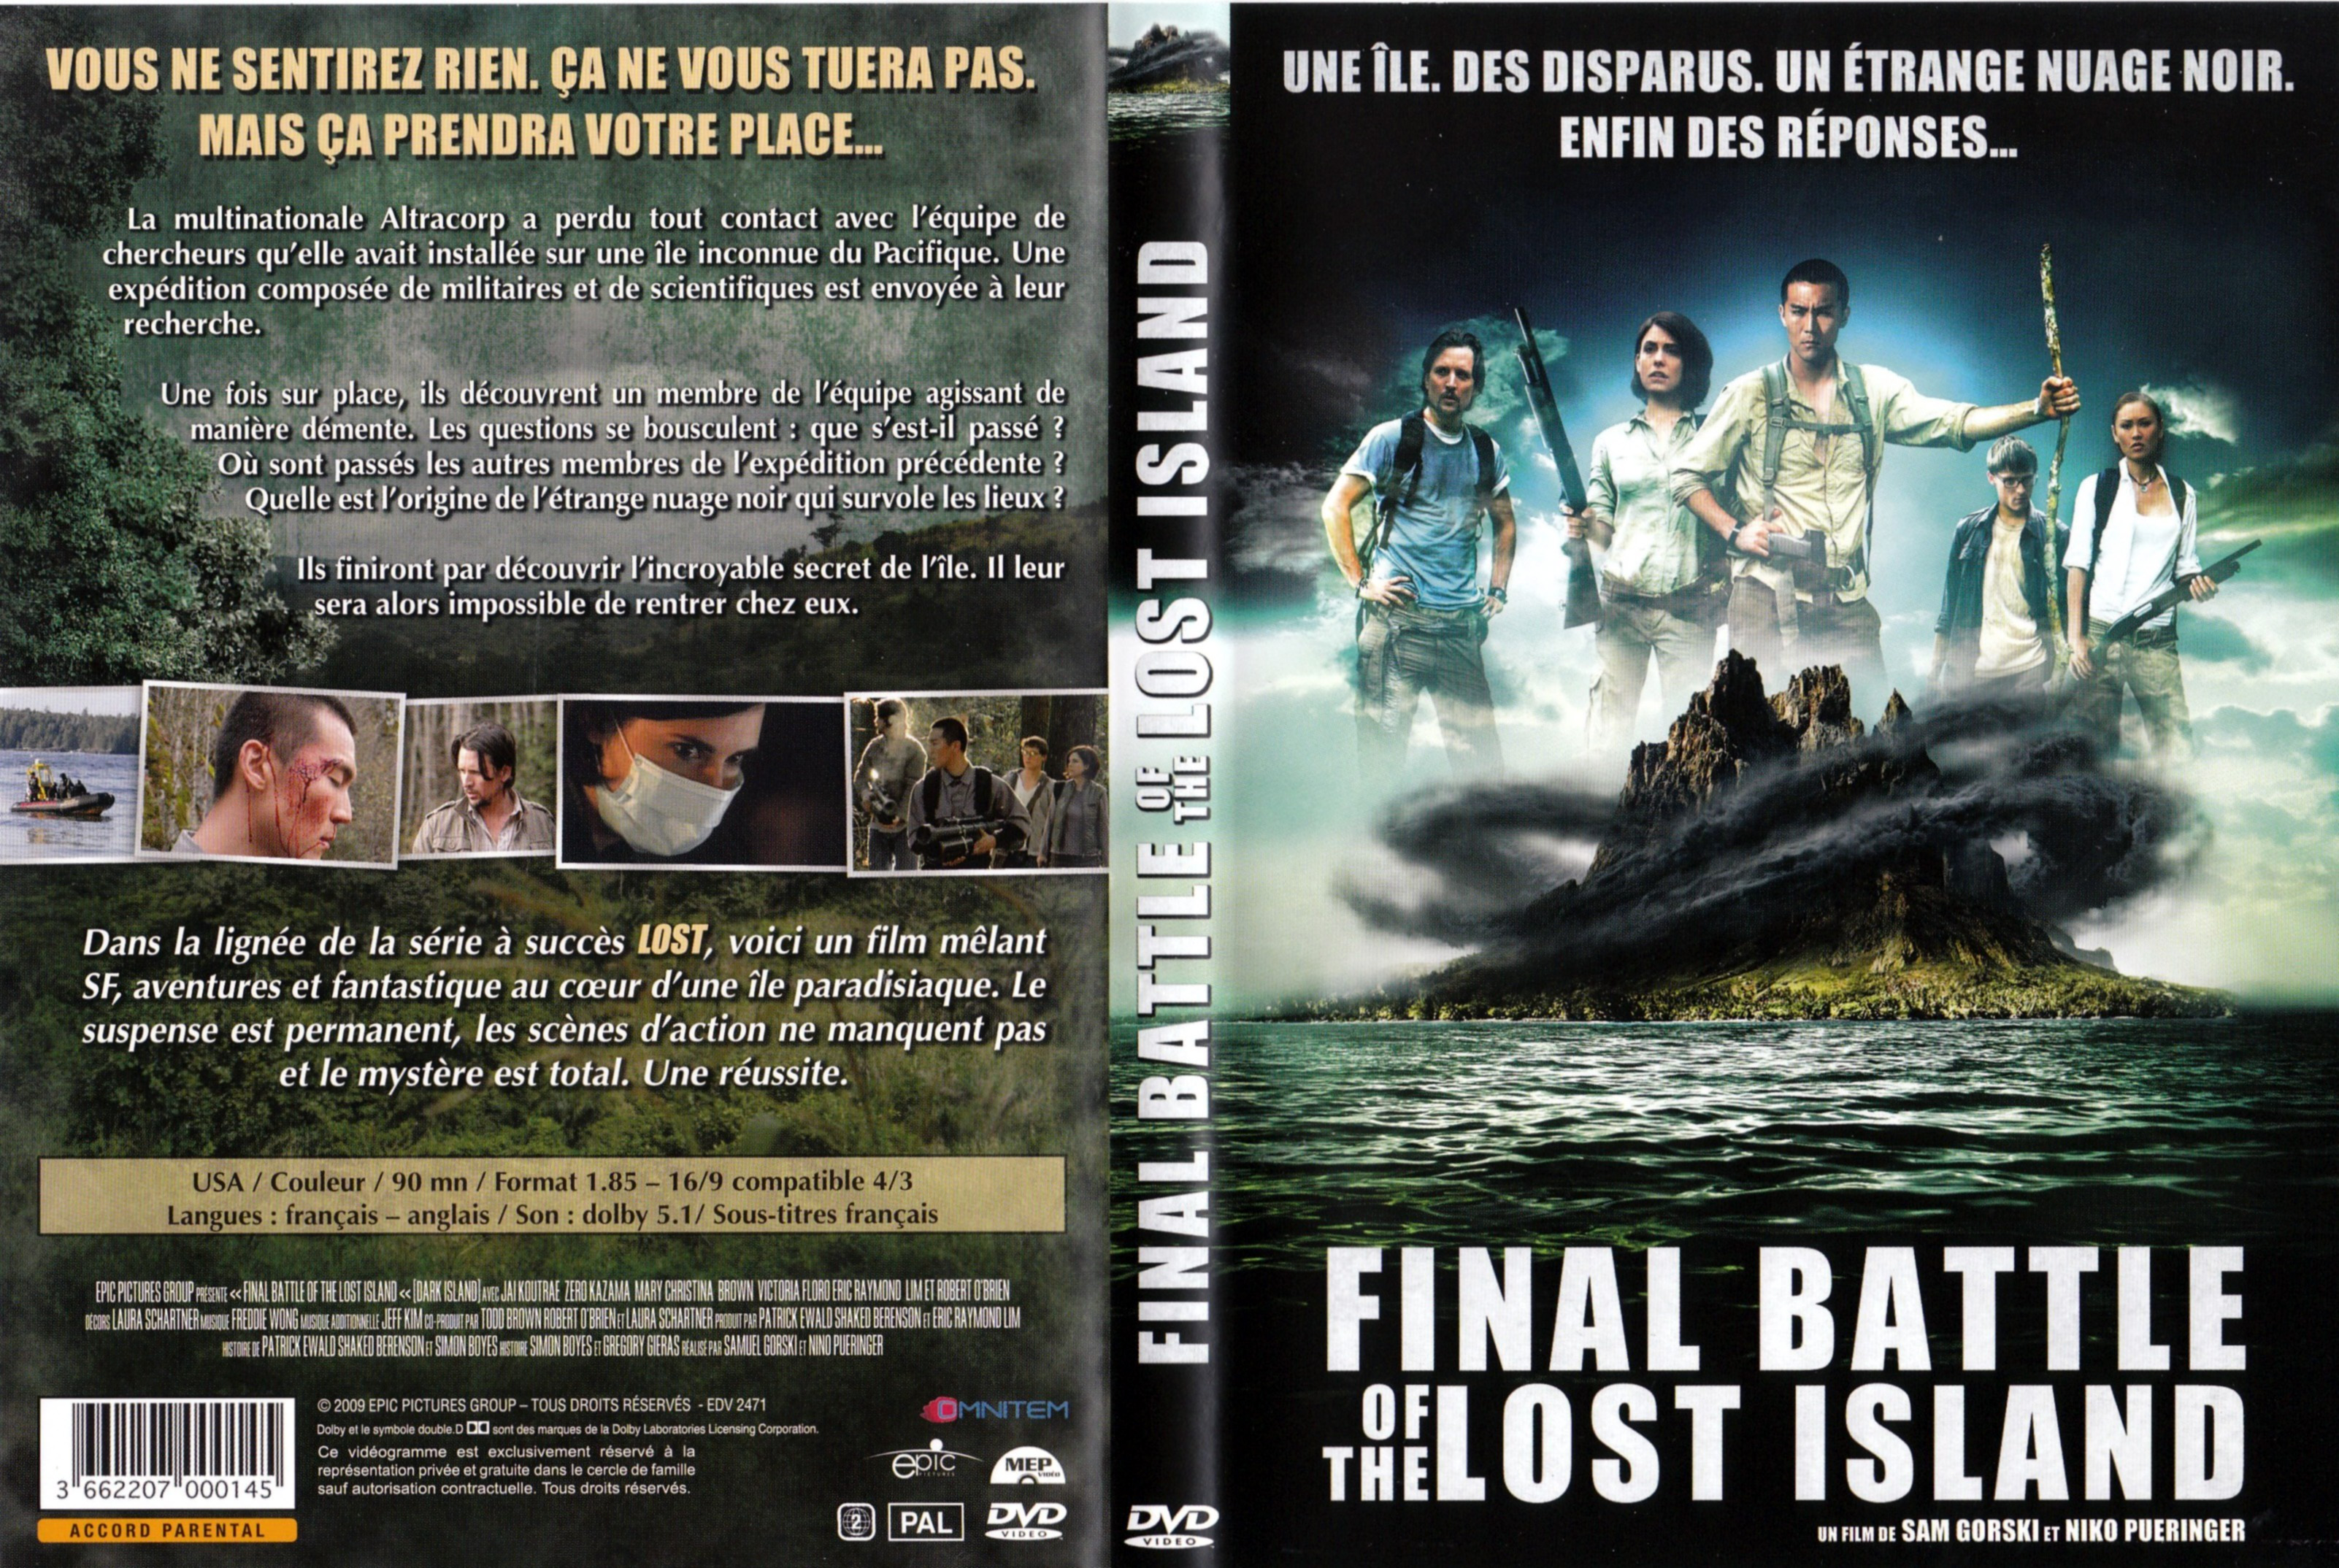 Jaquette DVD Final Battle of the Lost Island